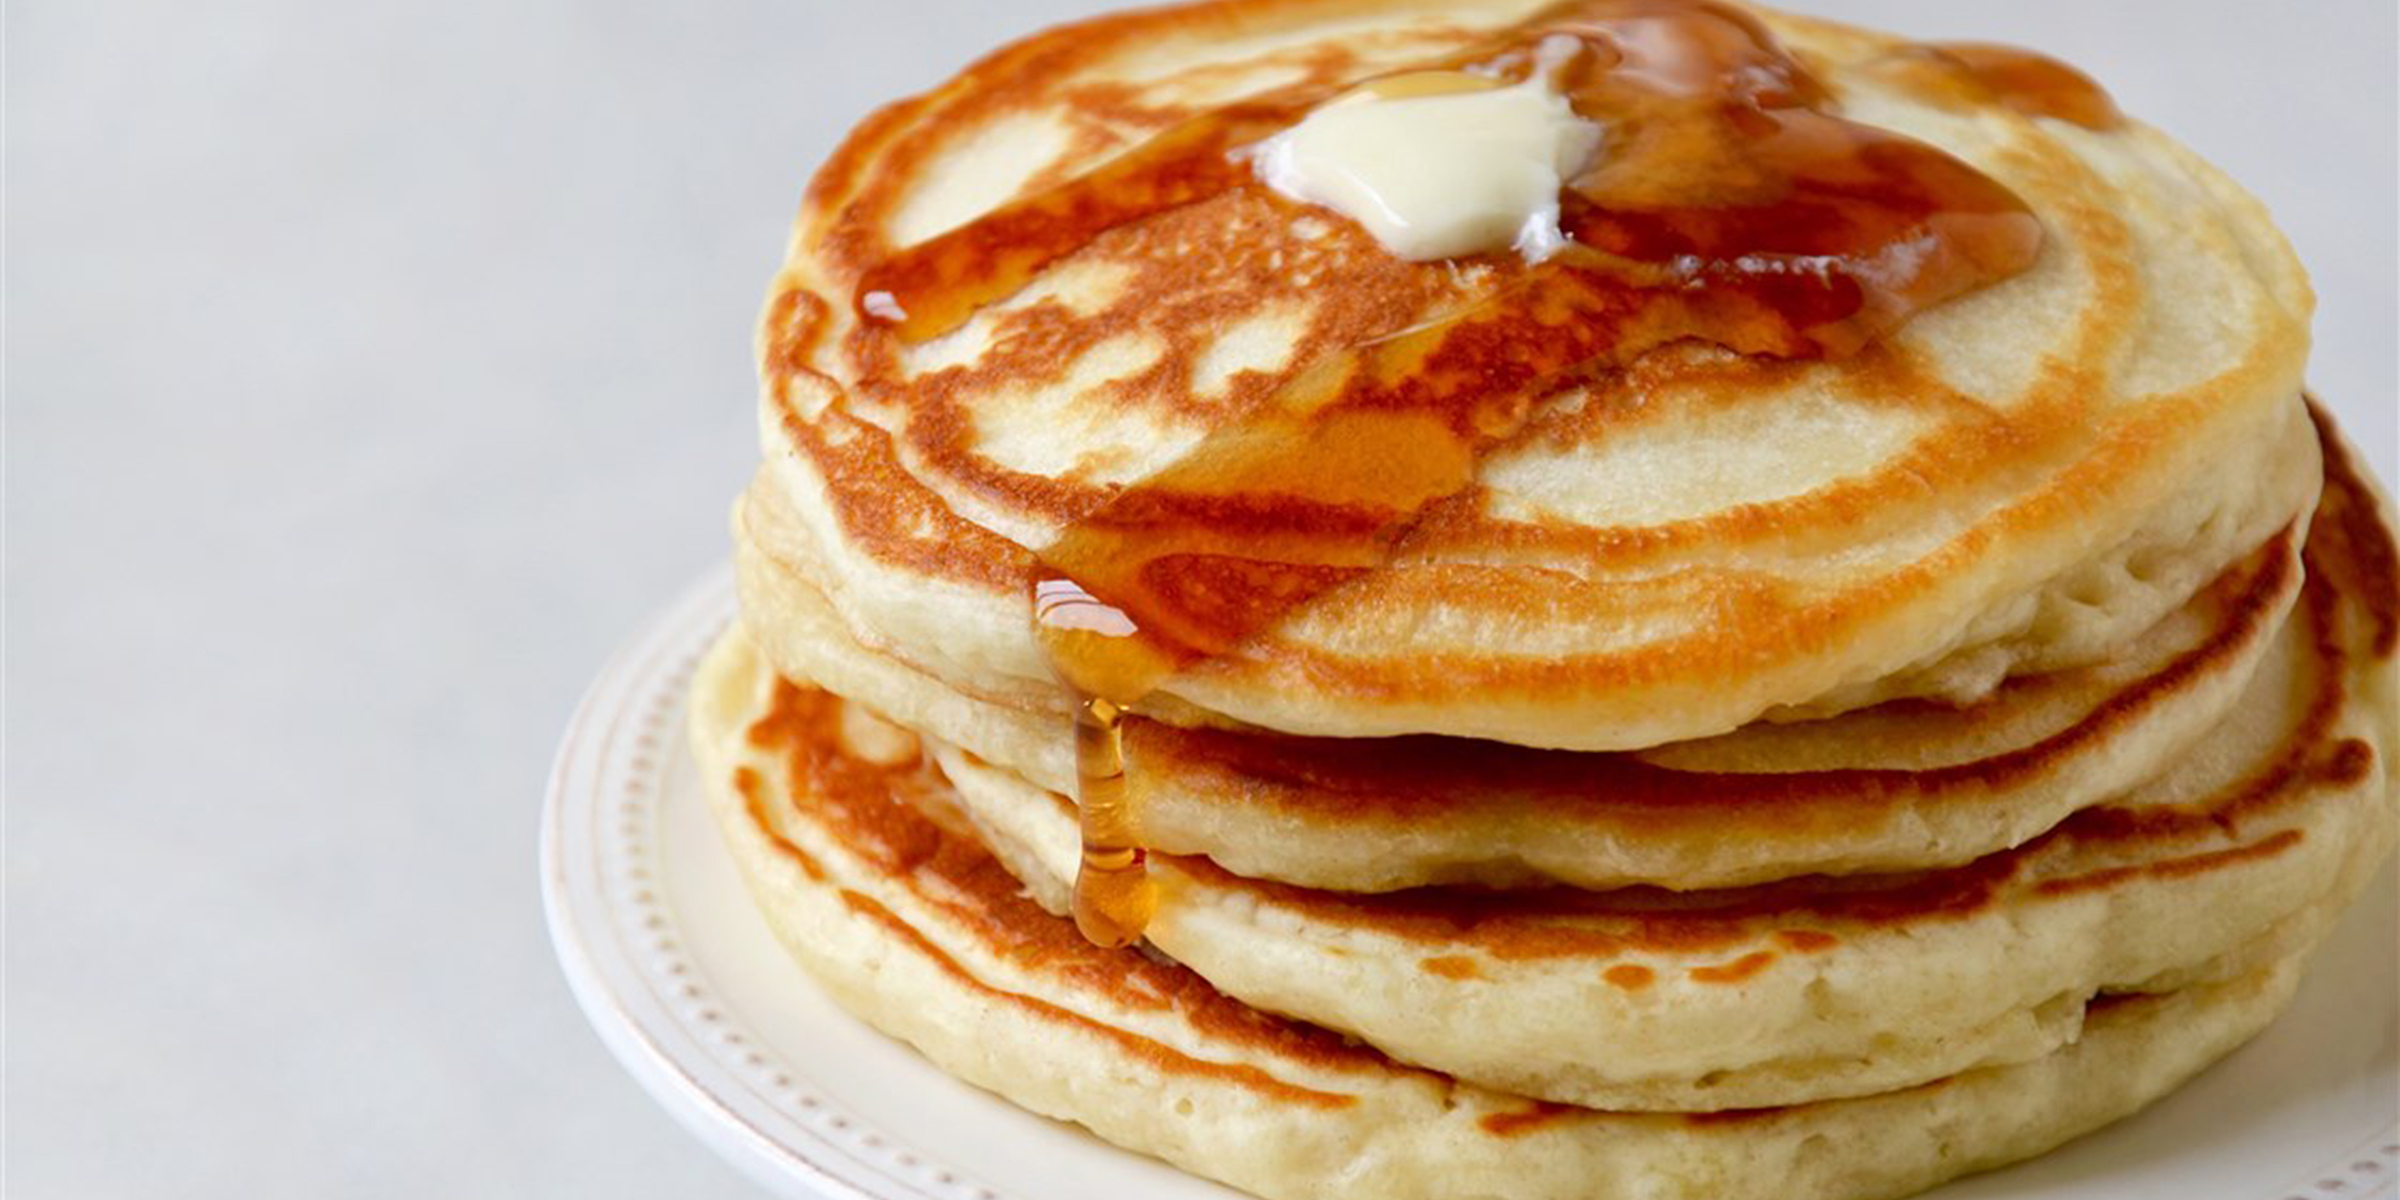 Recipe of Pancakes Step by Step